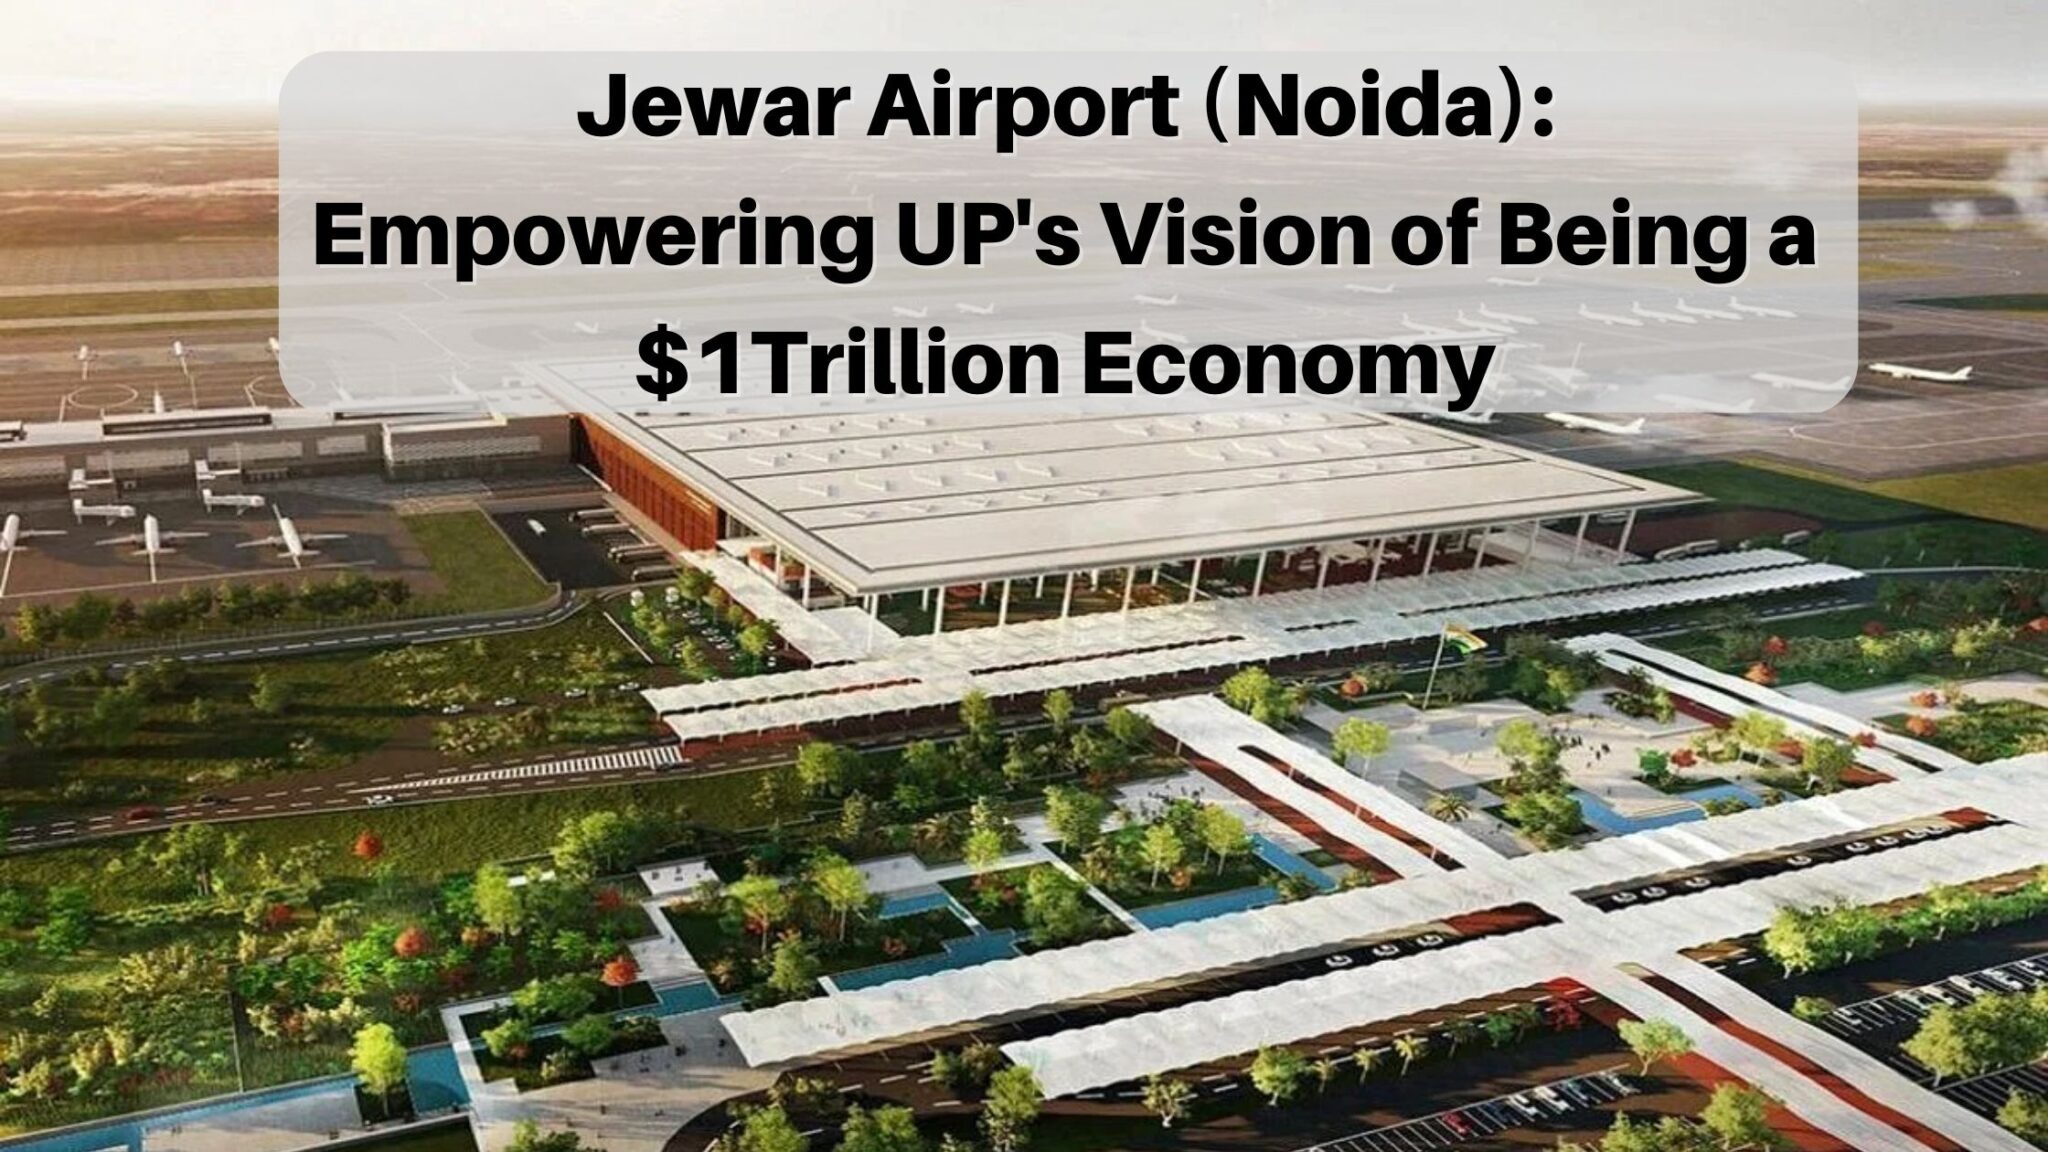 Jewar Airport (Noida) Empowering UP’s Vision of Being a $1Trillion Economy